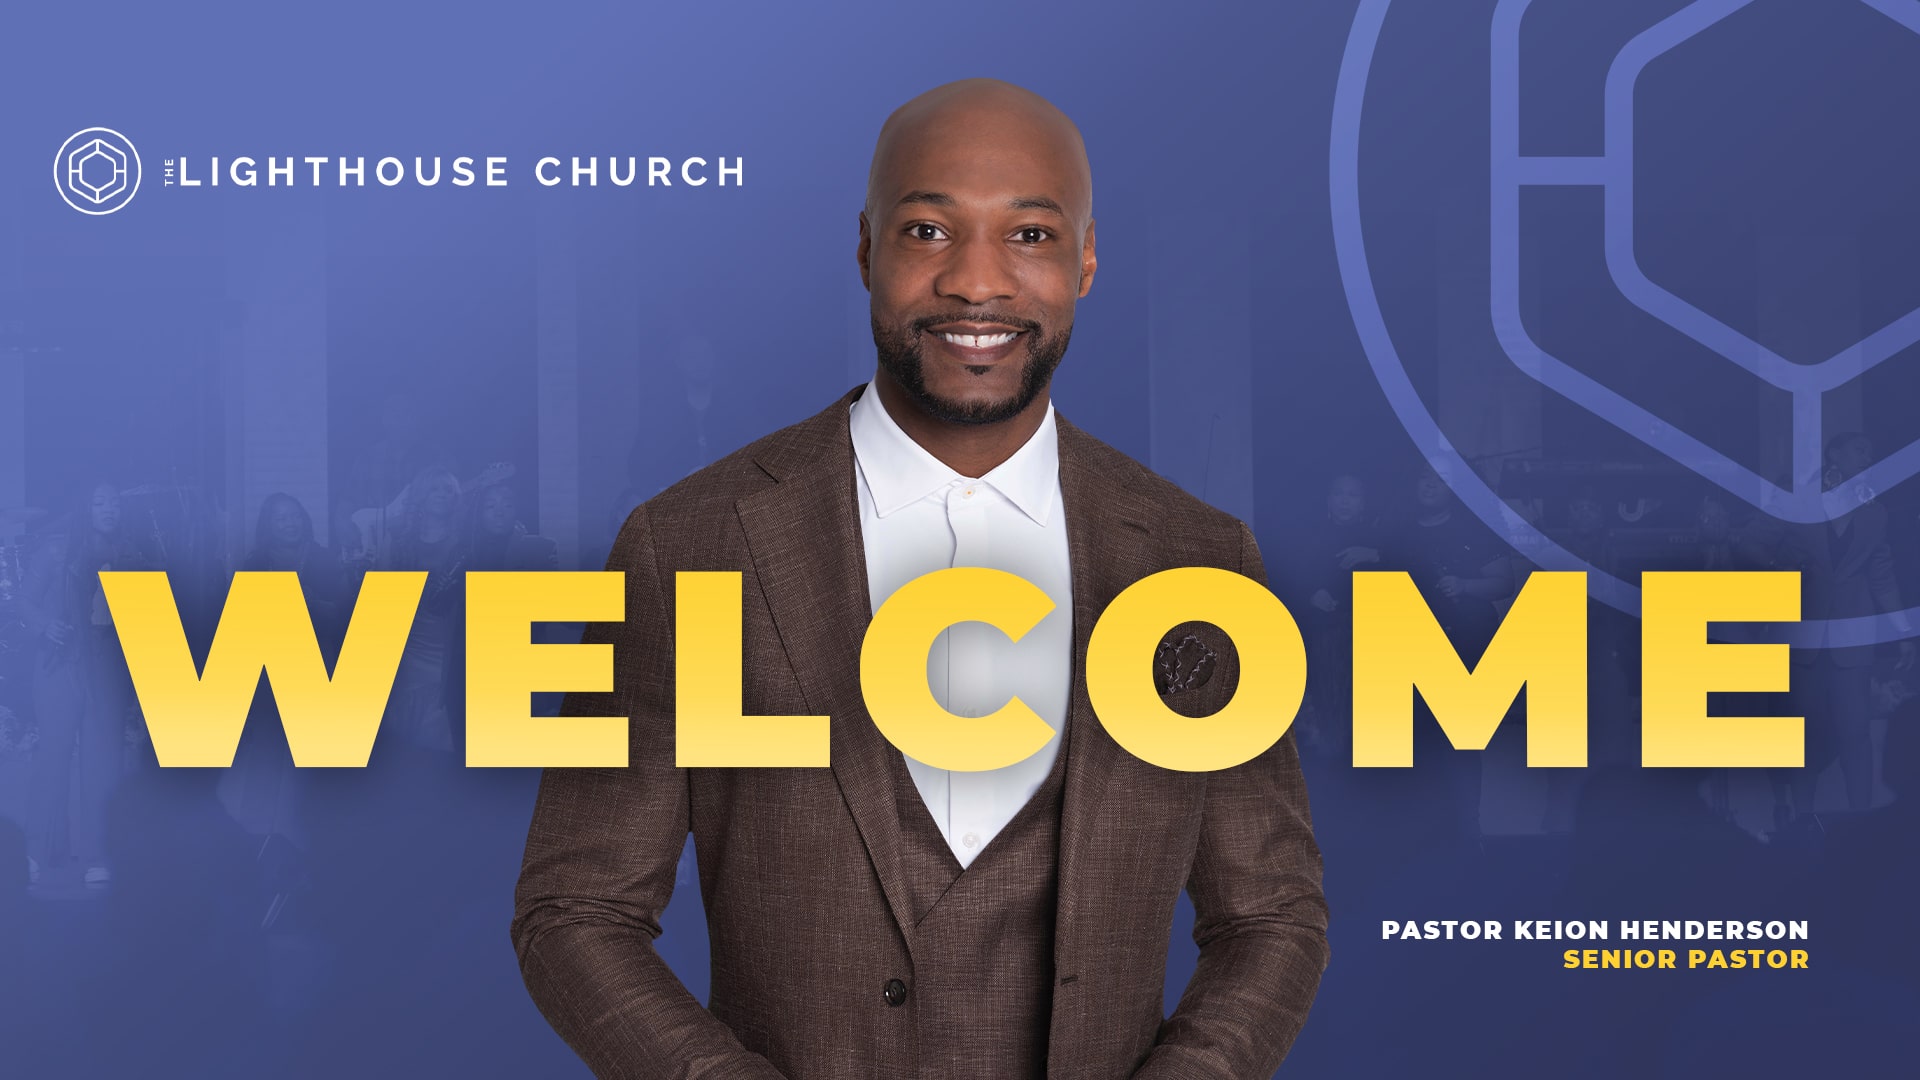 Welcome to The Light House Church of Houston, TX